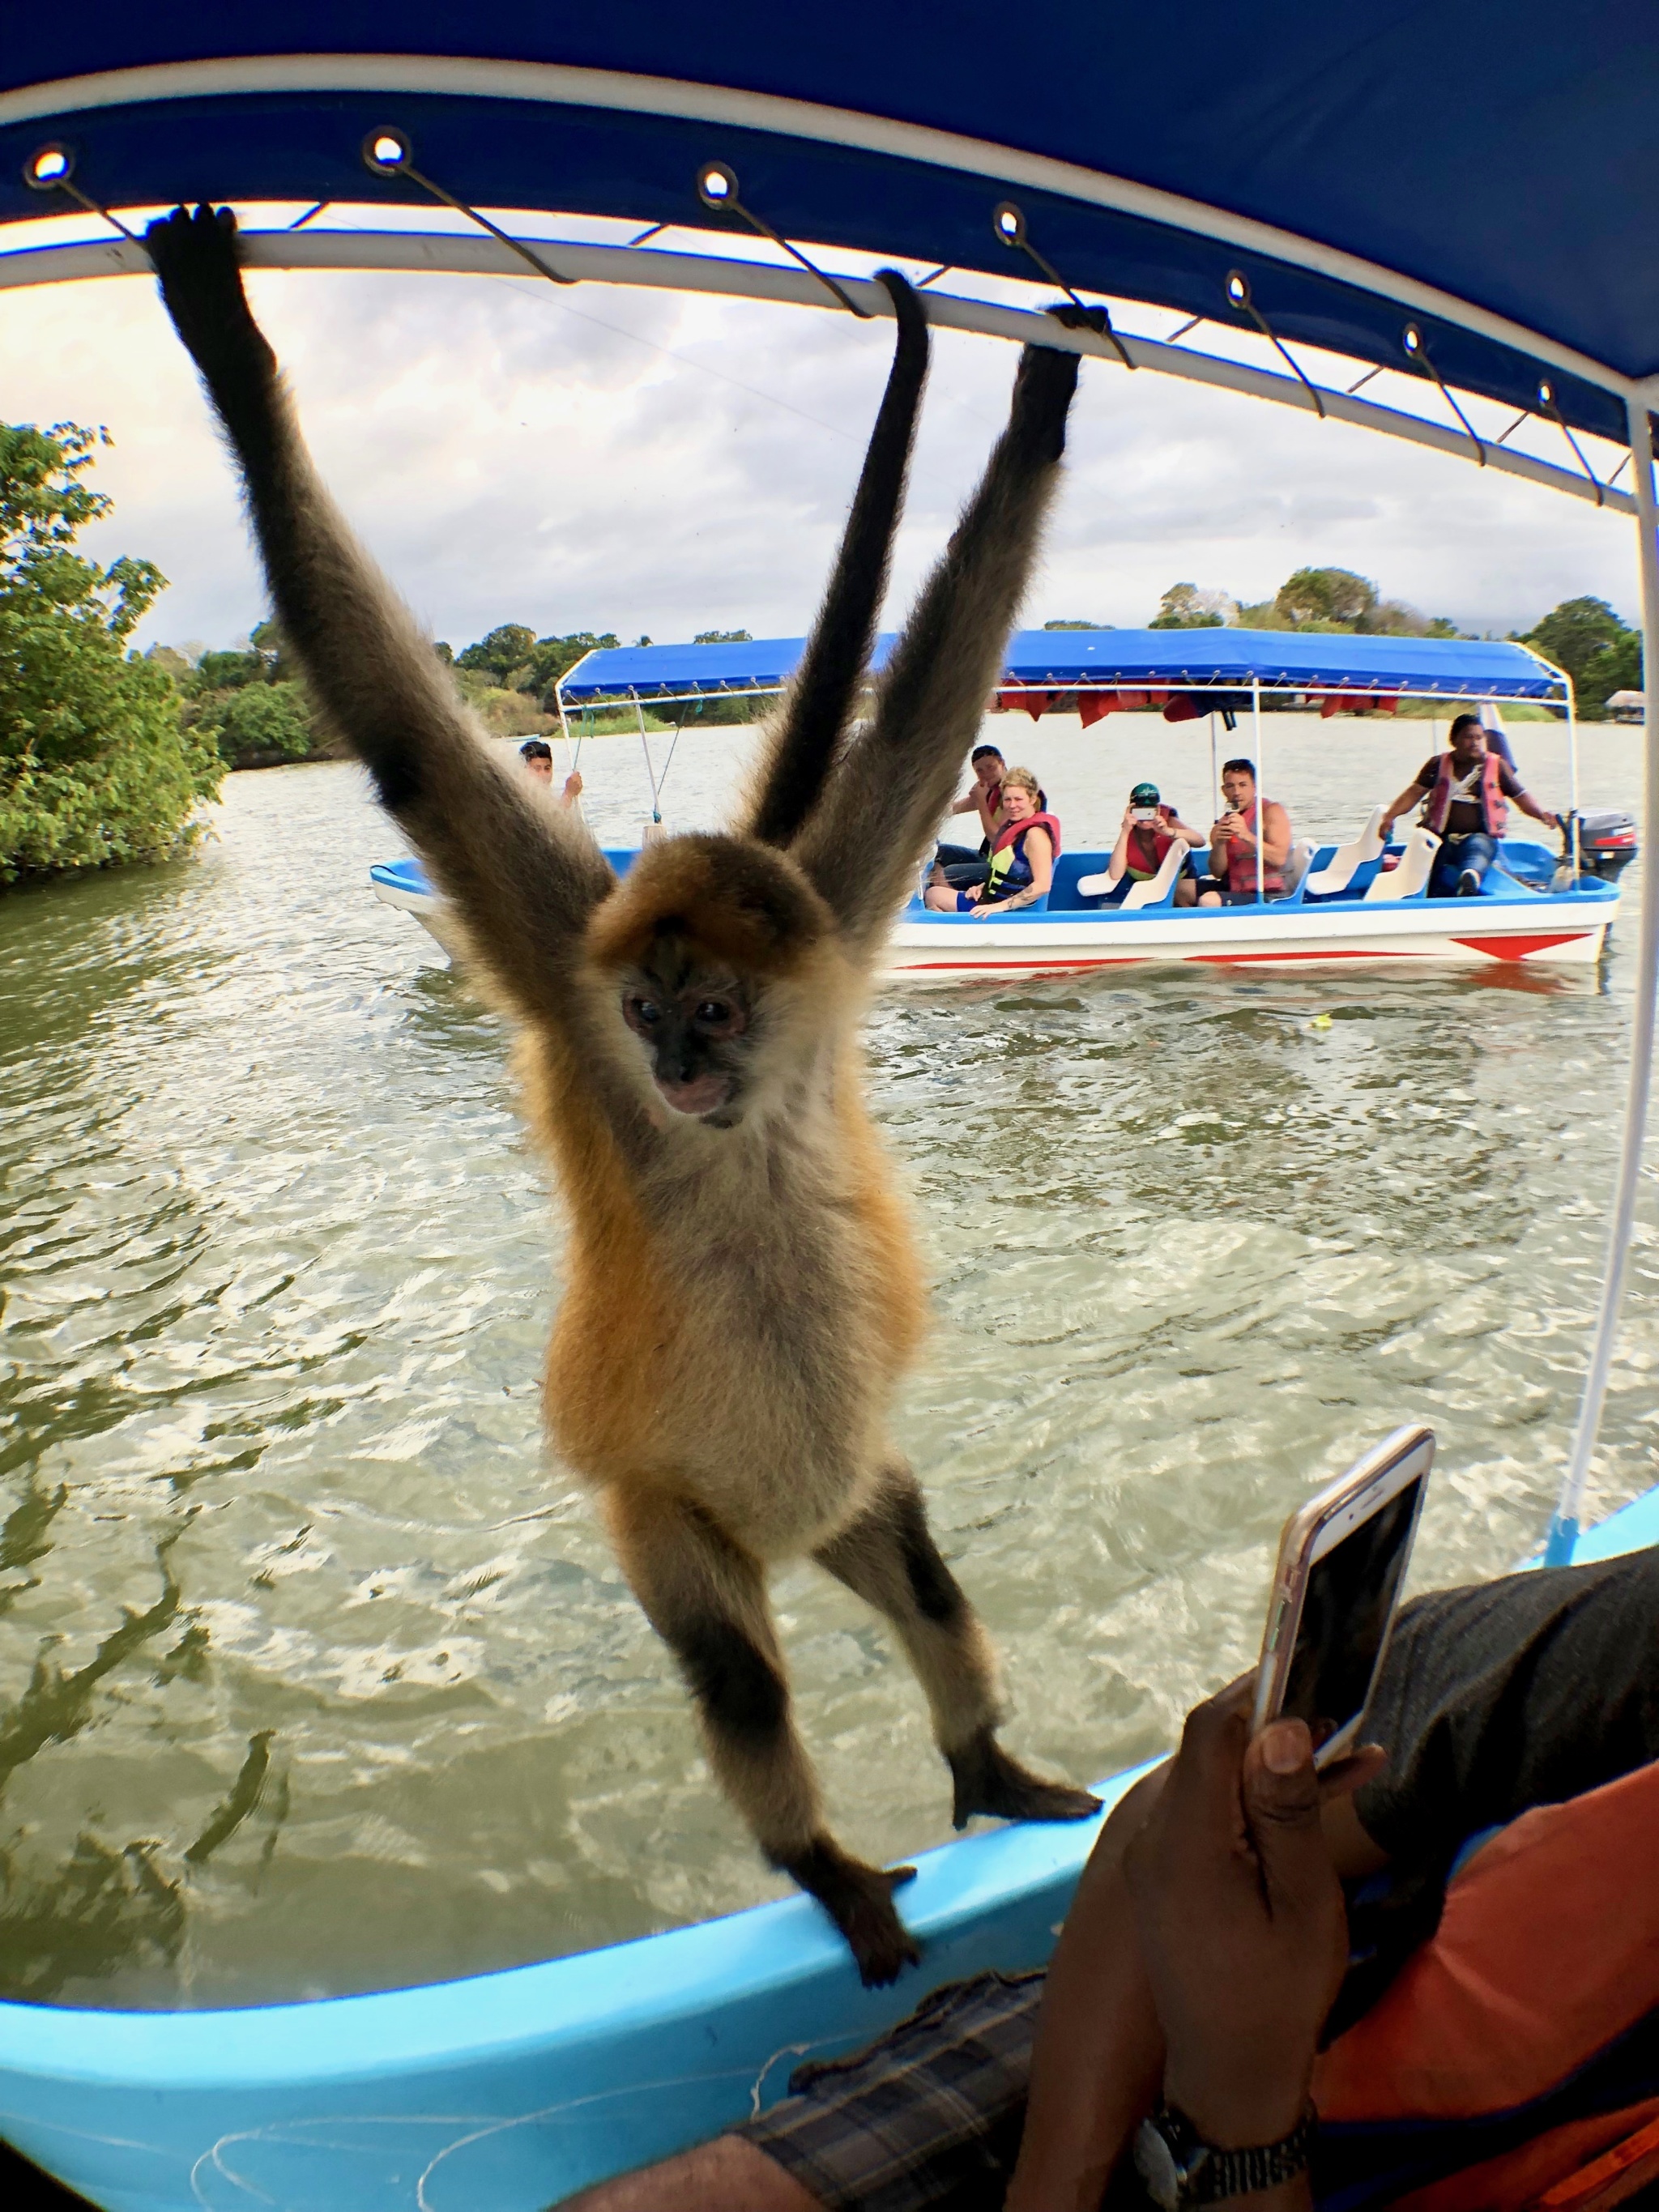 Spider monkey at the islets of Granada in Nicaragua